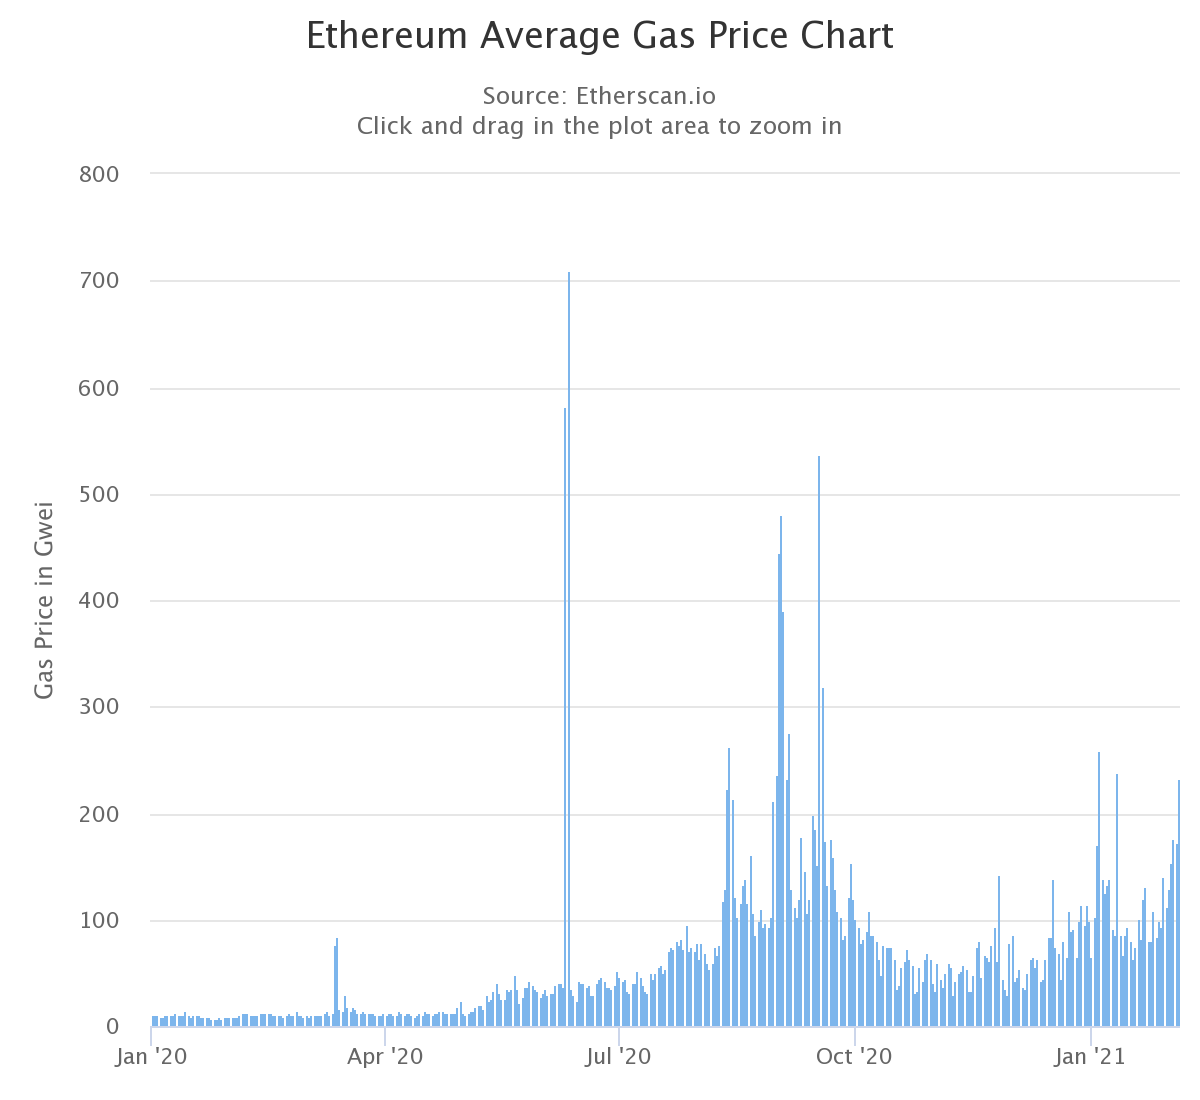 Ethereum gas prices from Jan. 1, 2020, to Feb. 4, 2021. Source: Etherscan